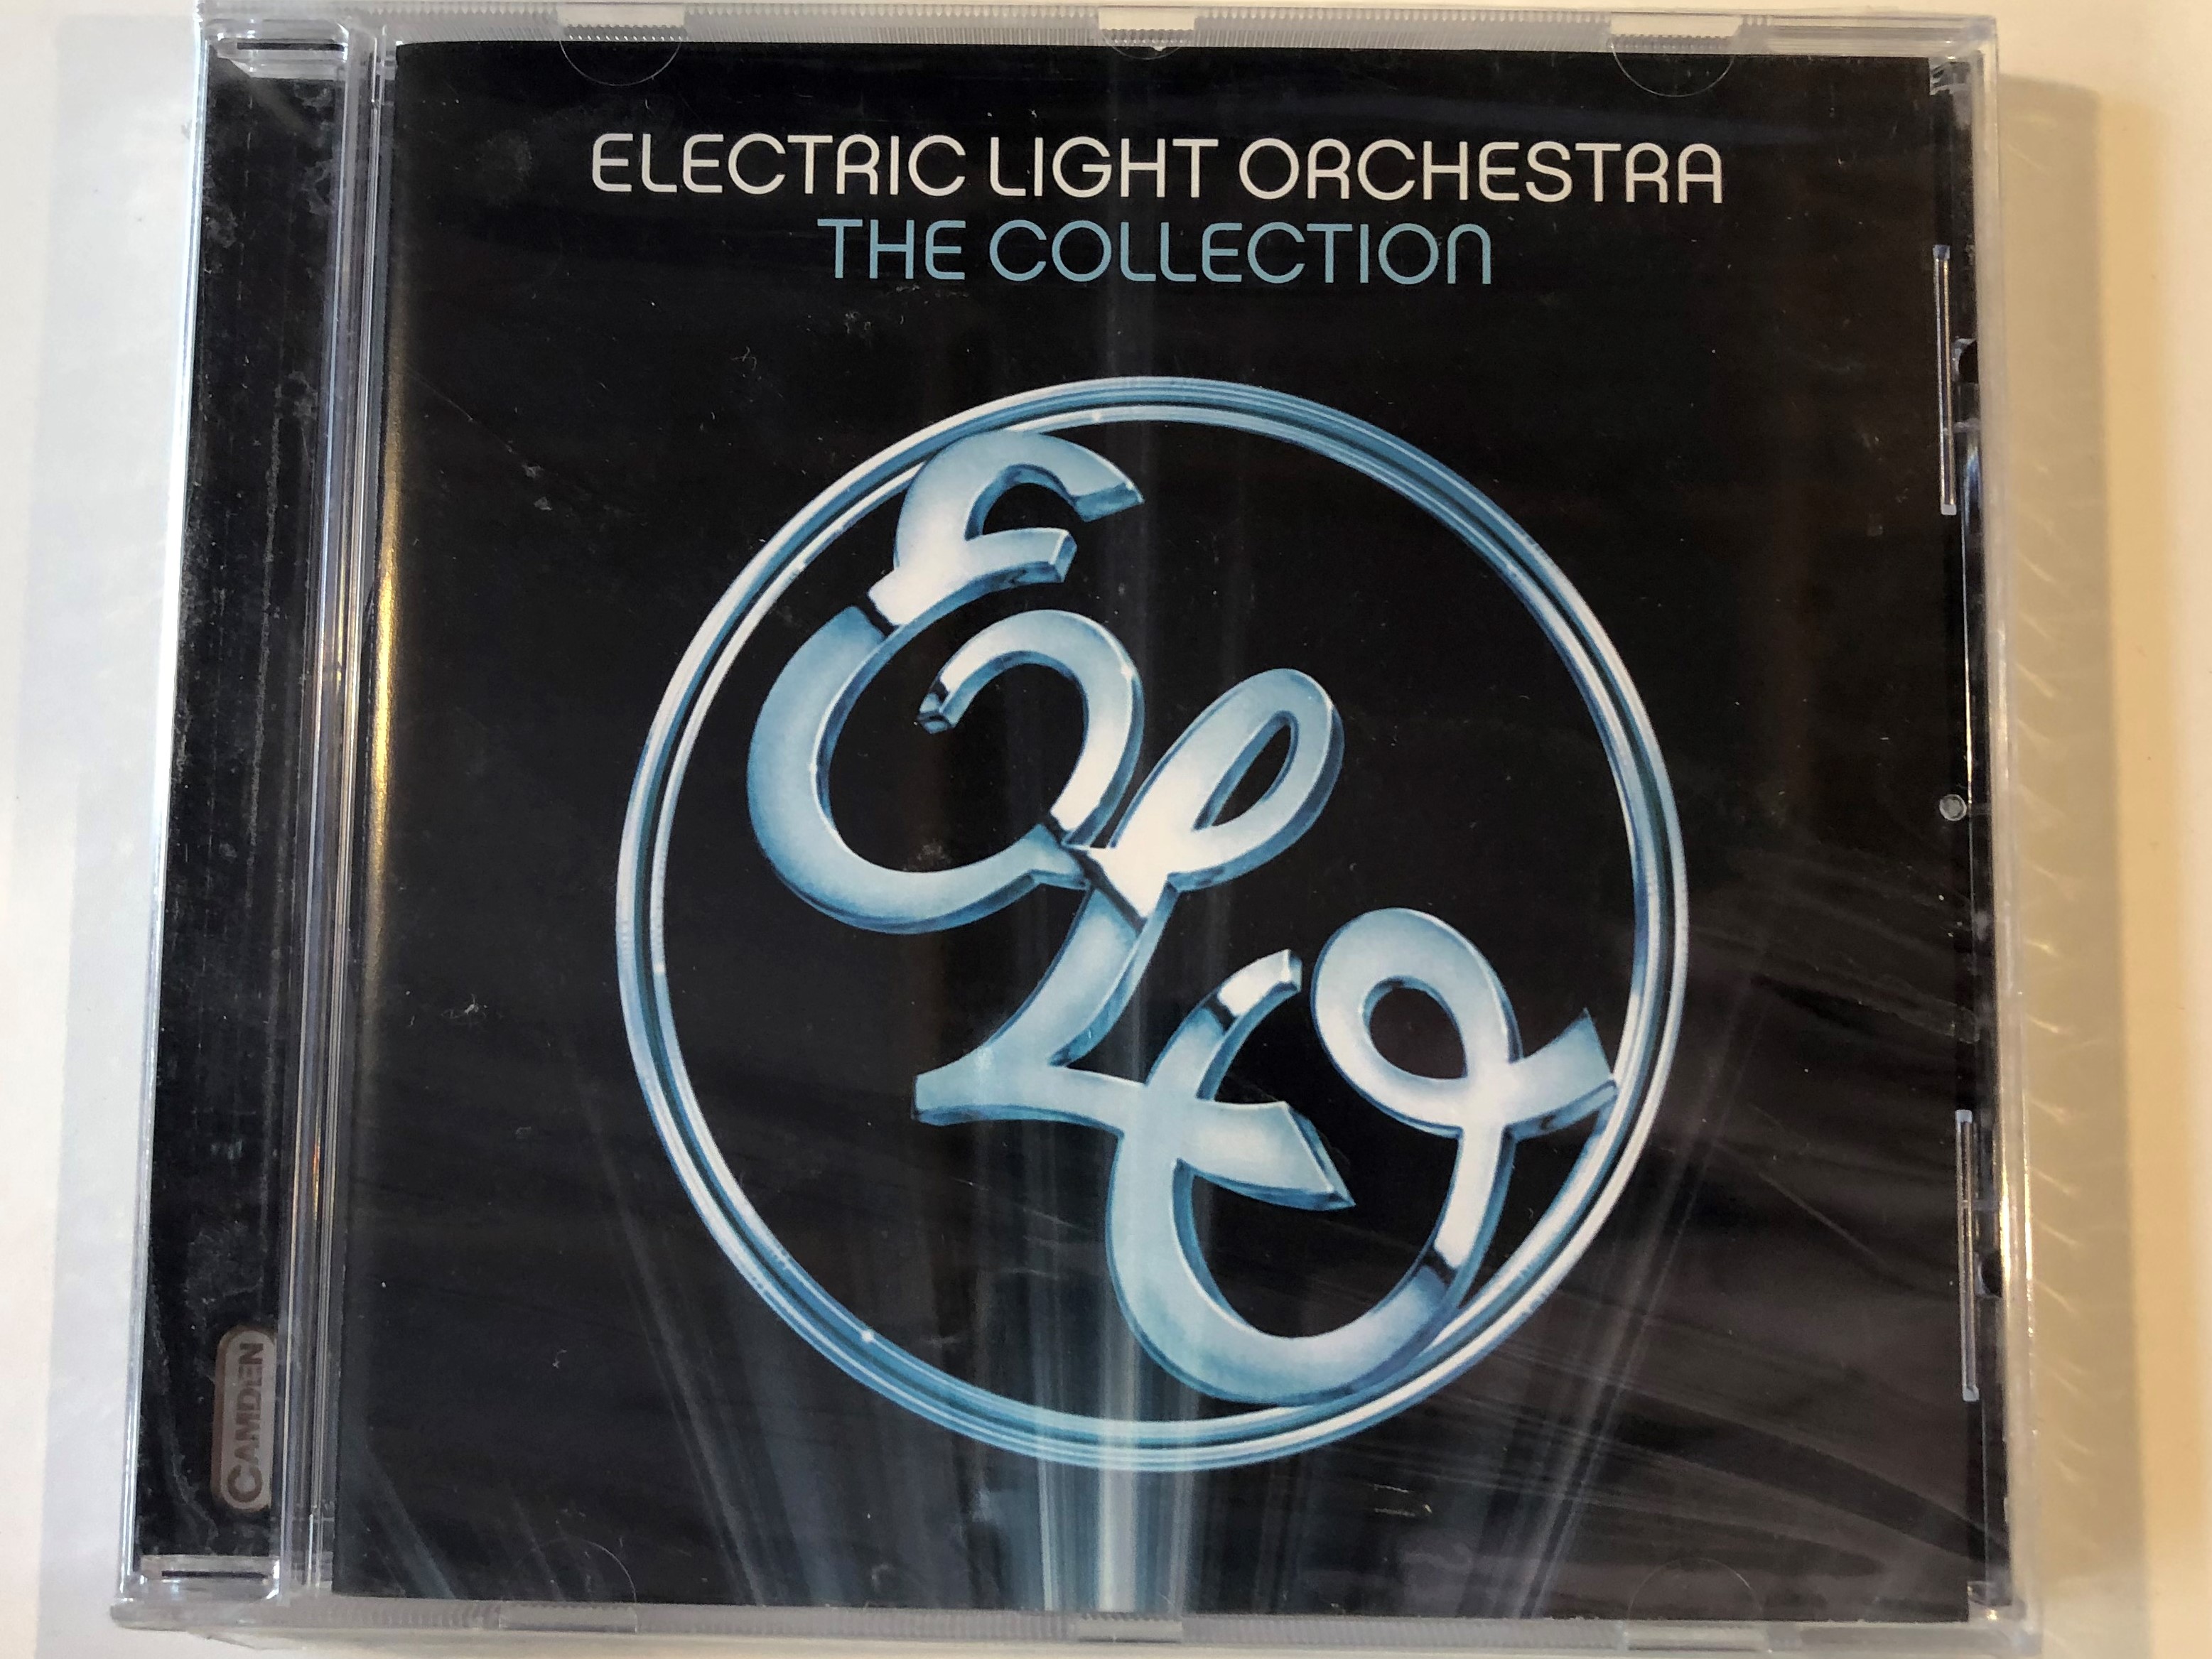 electric-light-orchestra-the-collection-sony-music-audio-cd-2009-88697480462-1-.jpg